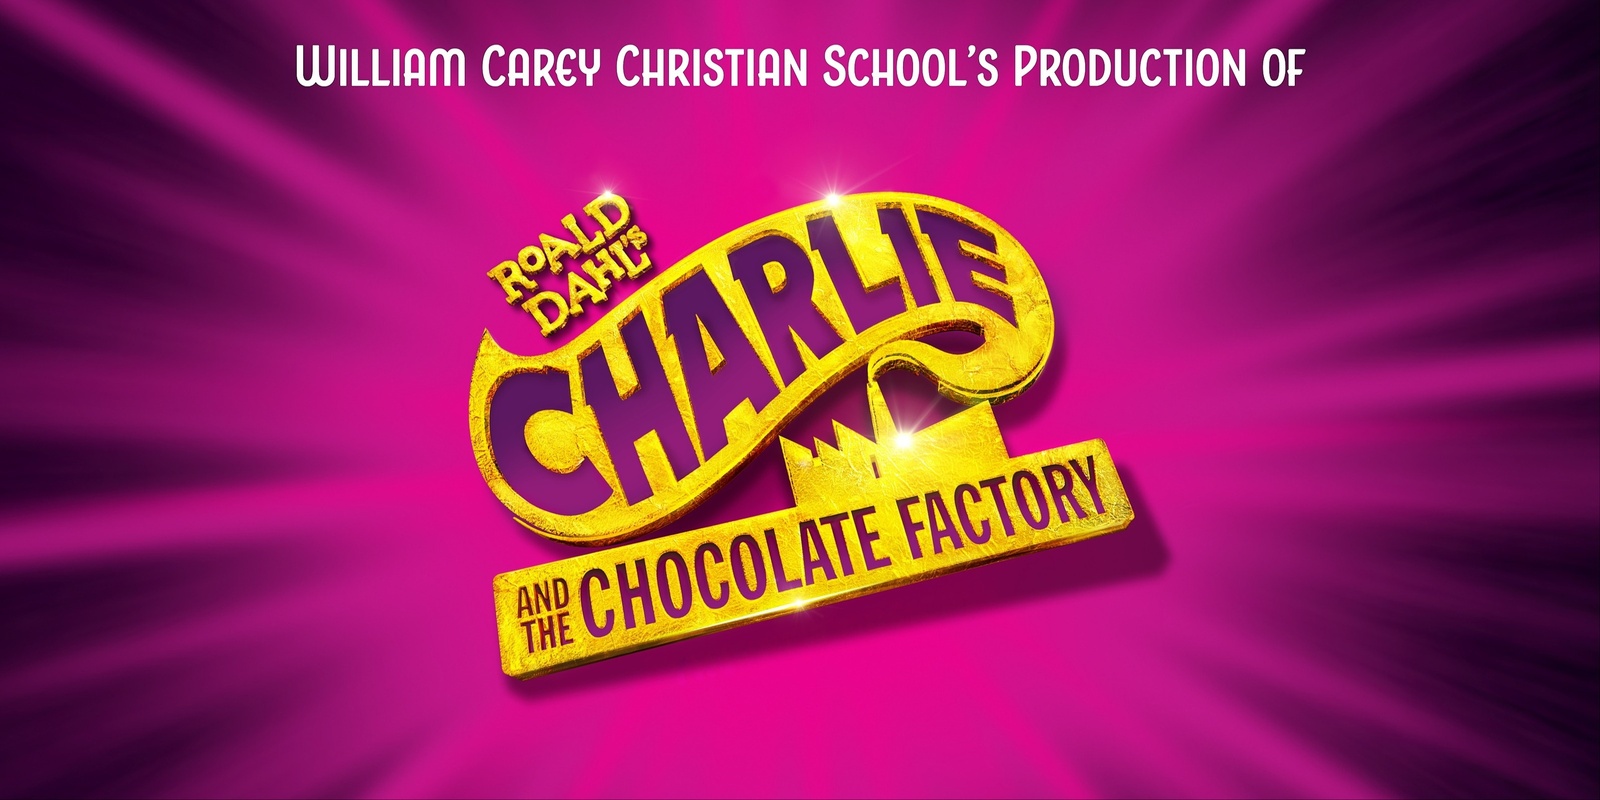 Charlie and the Chocolate Factory at WCCS